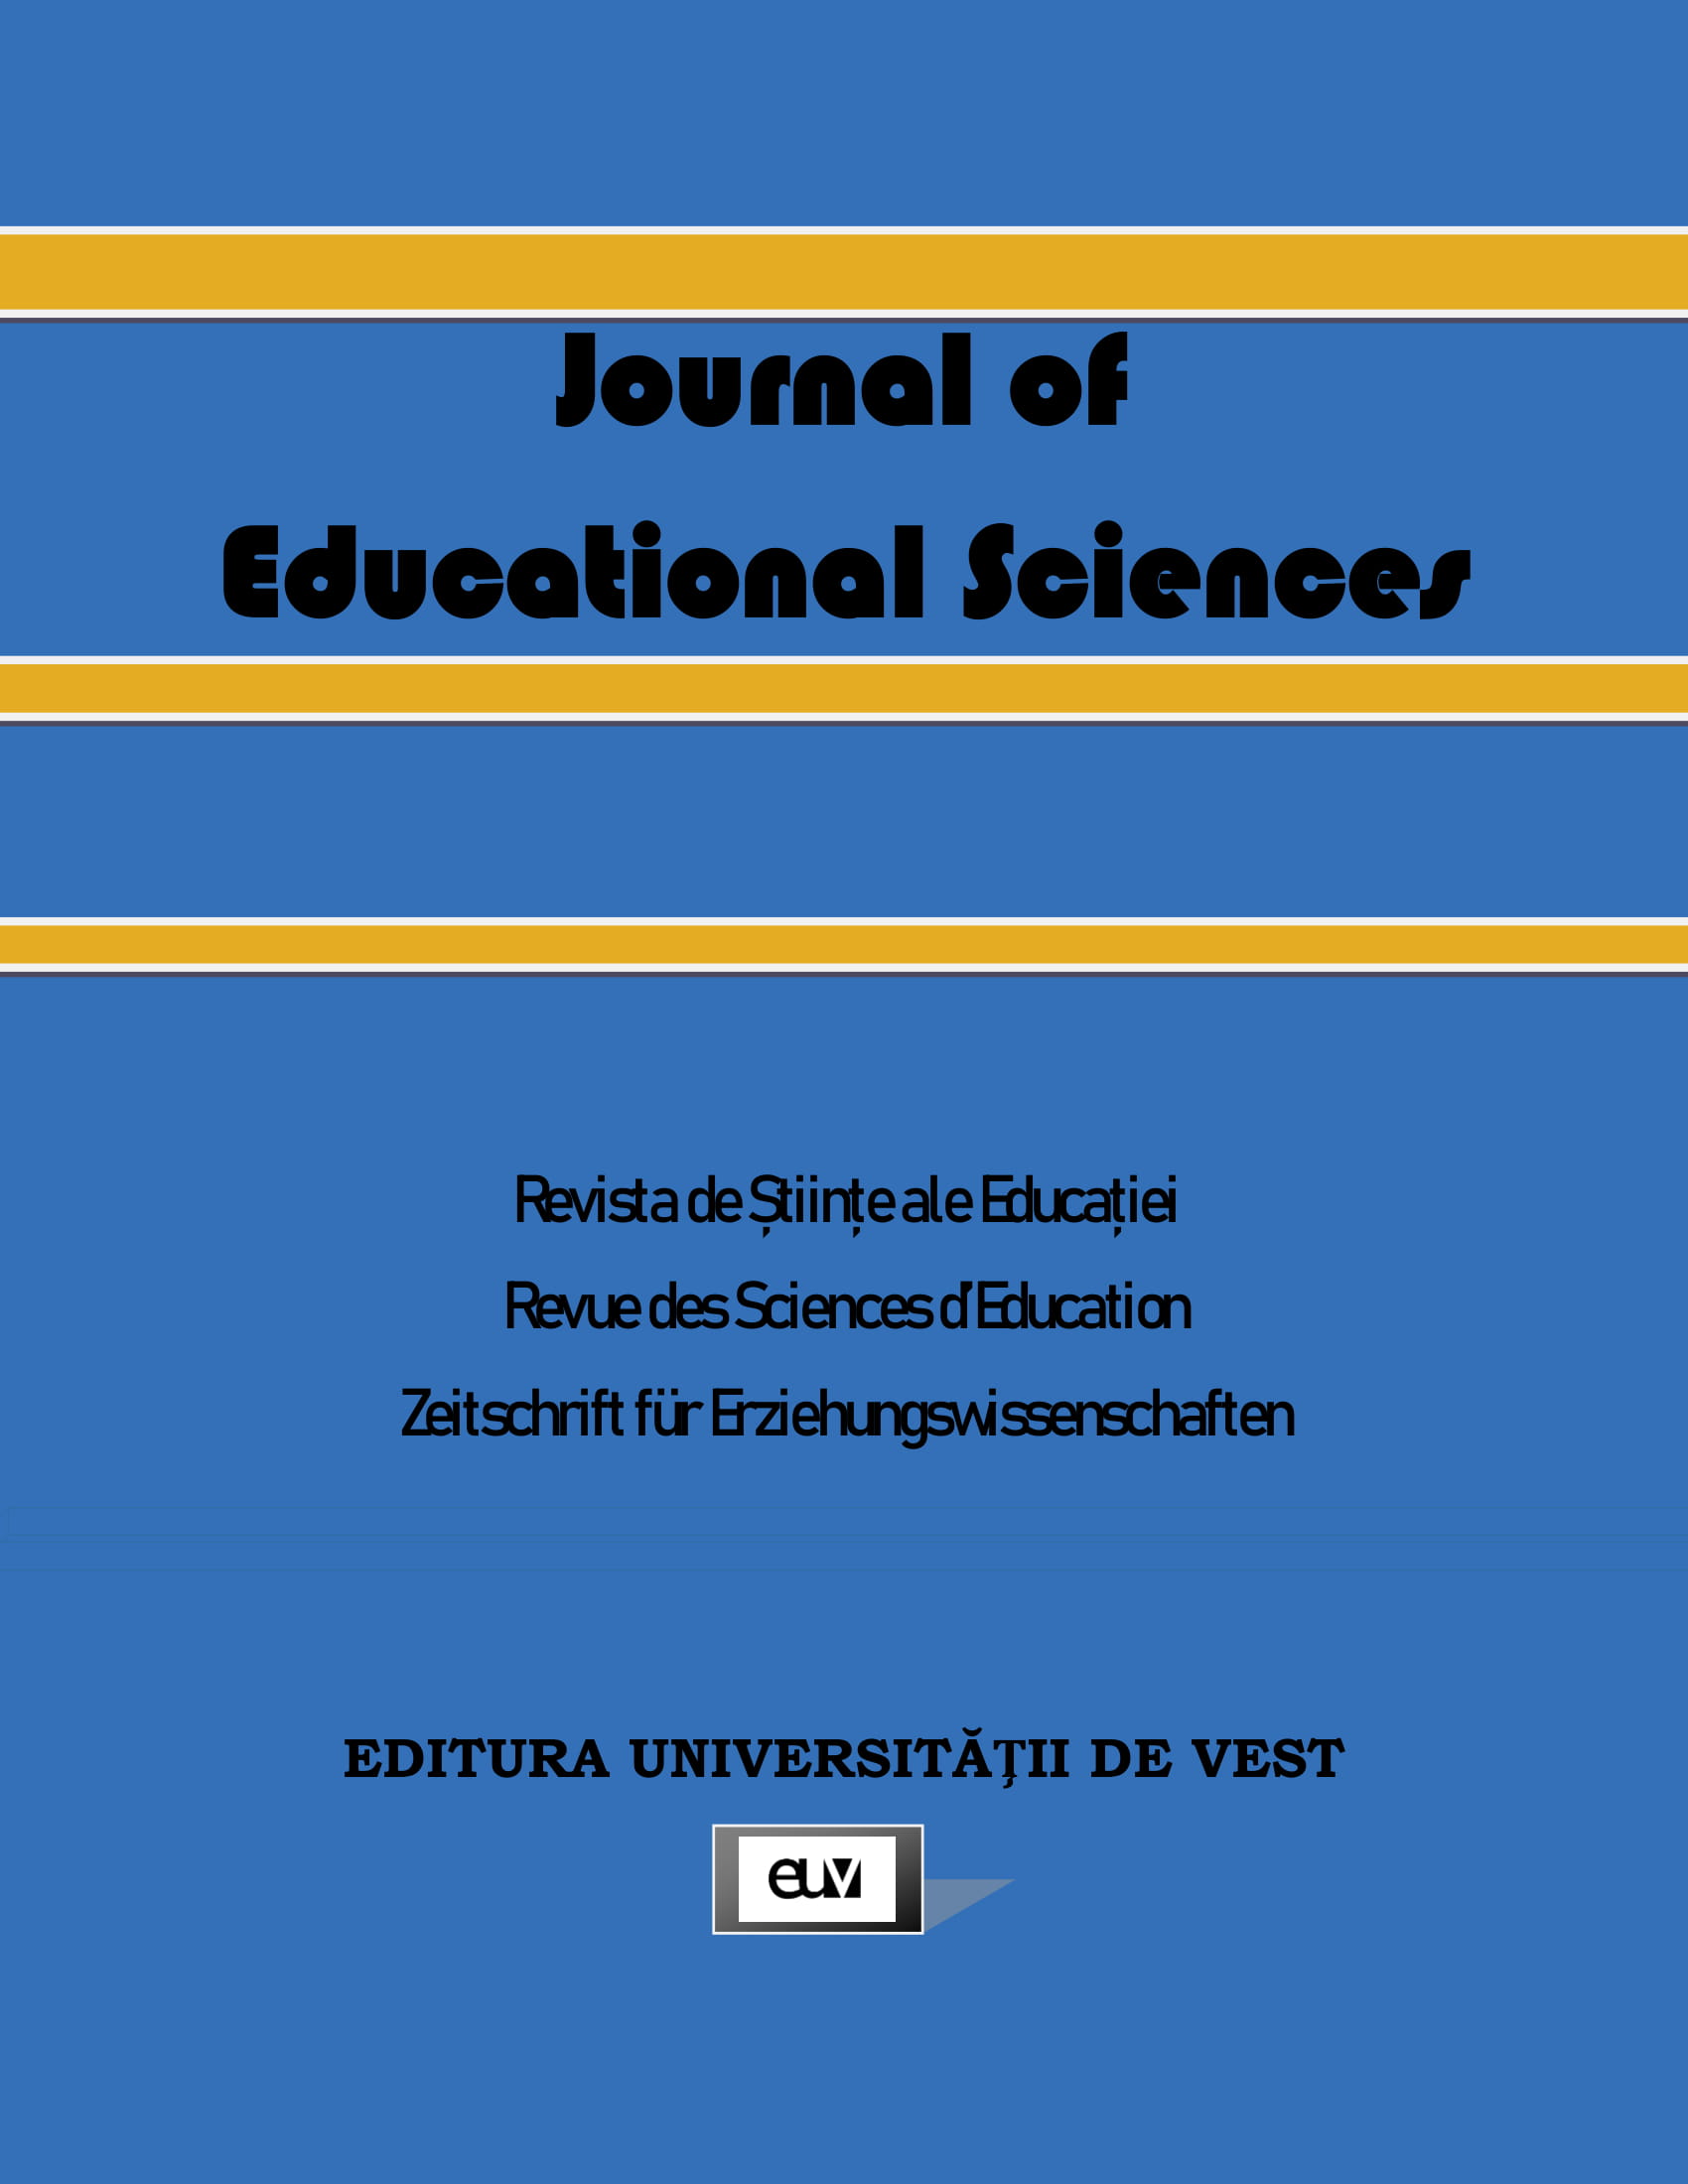 Self-concept, interpersonal processes, exploratory and health risk
behaviors in adolescents – a study regarding student engagement
with school Cover Image